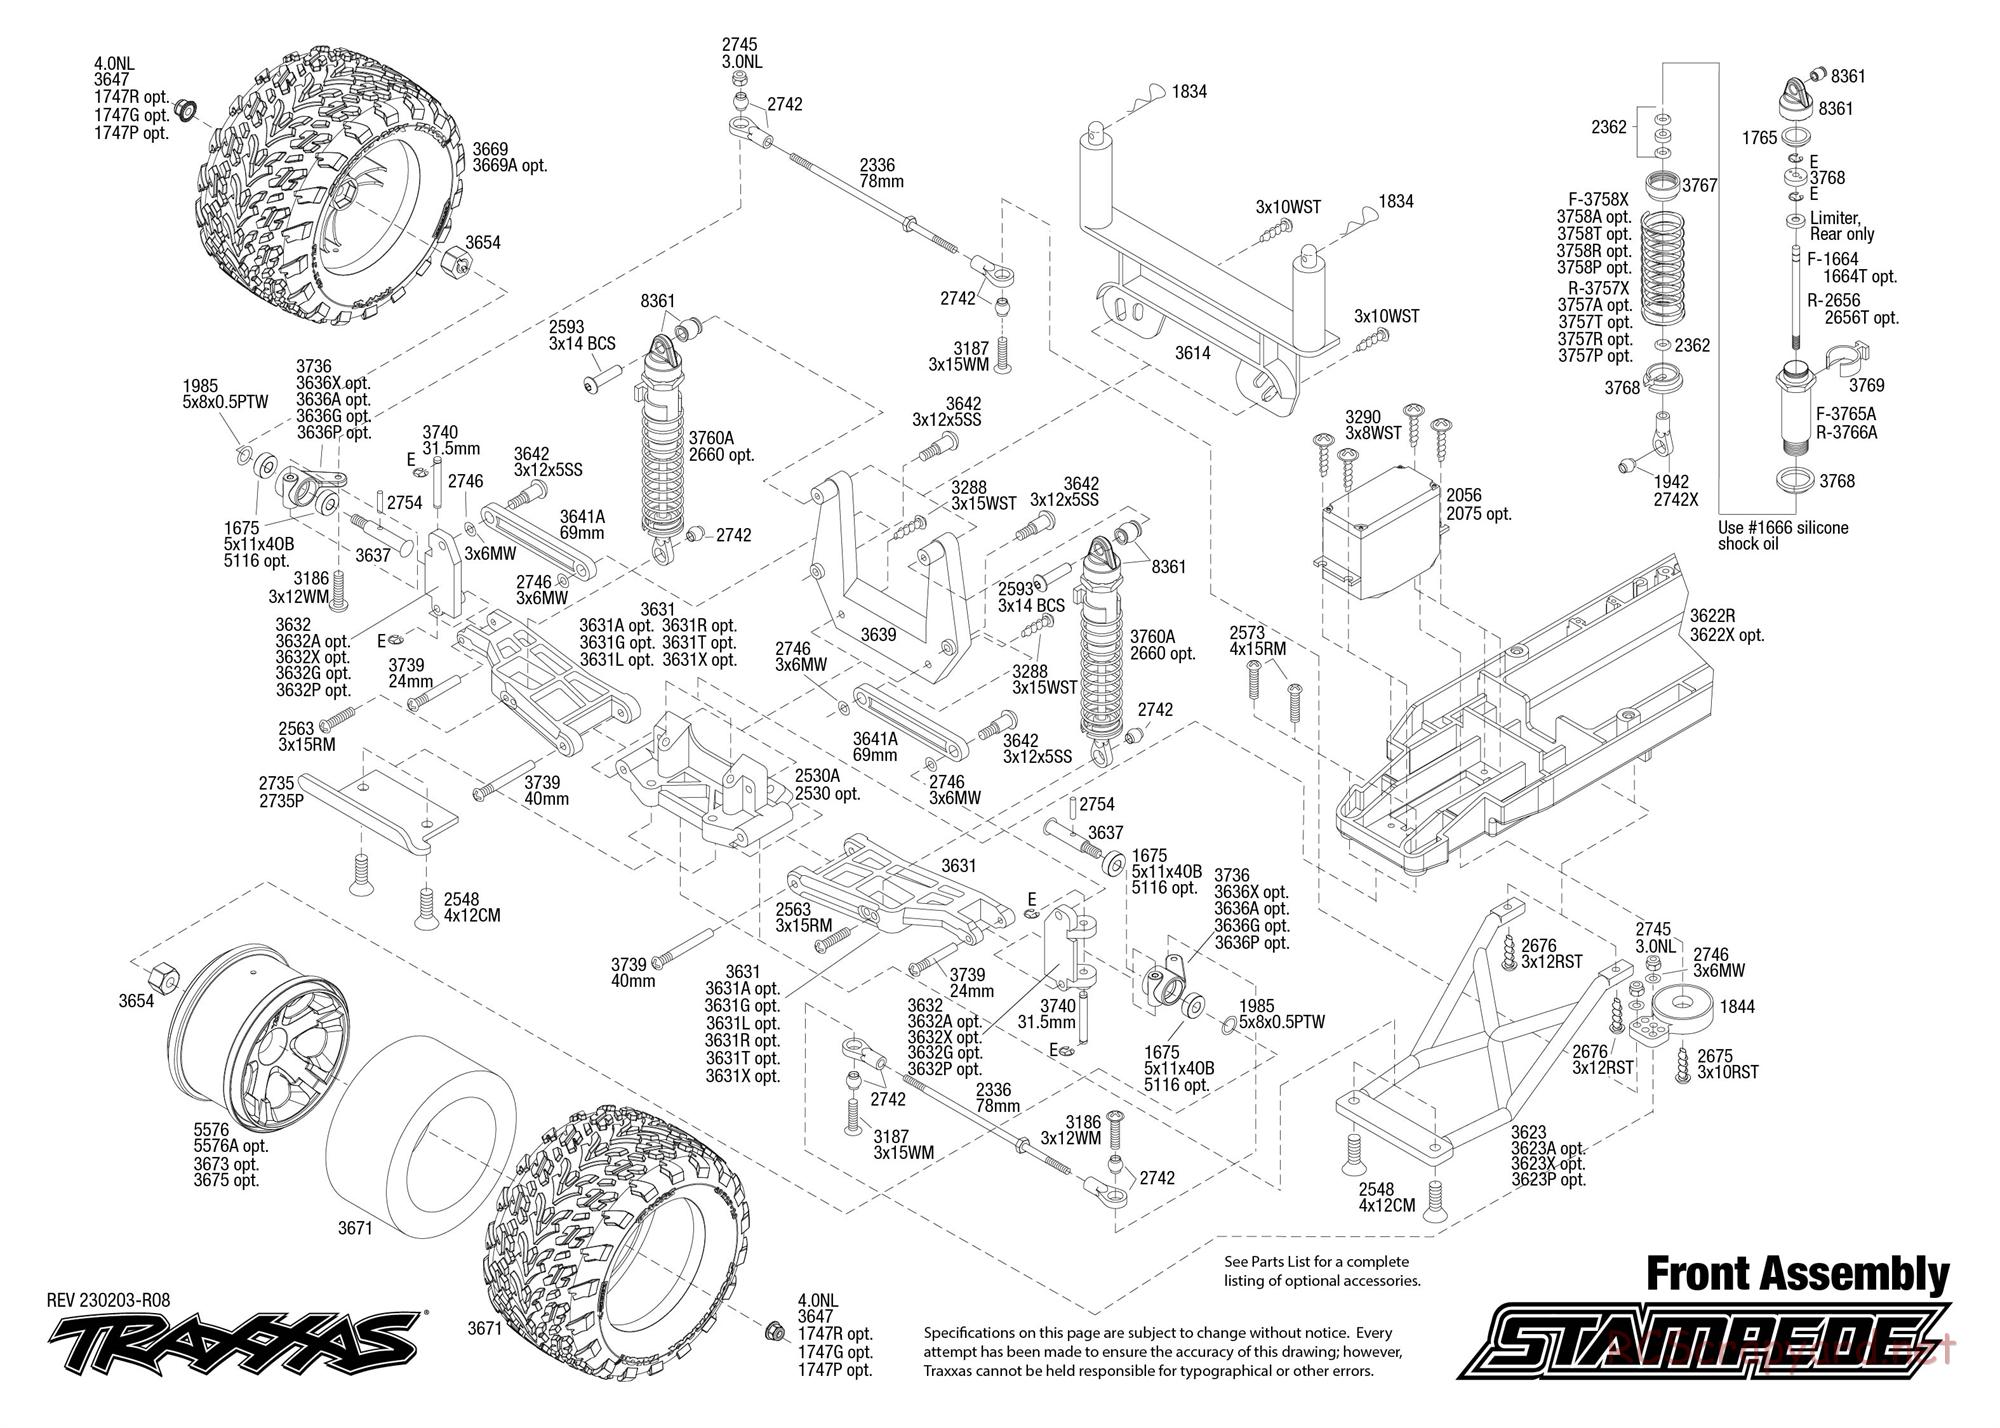 Traxxas - Stampede XL-5 (2015) - Exploded Views - Page 2